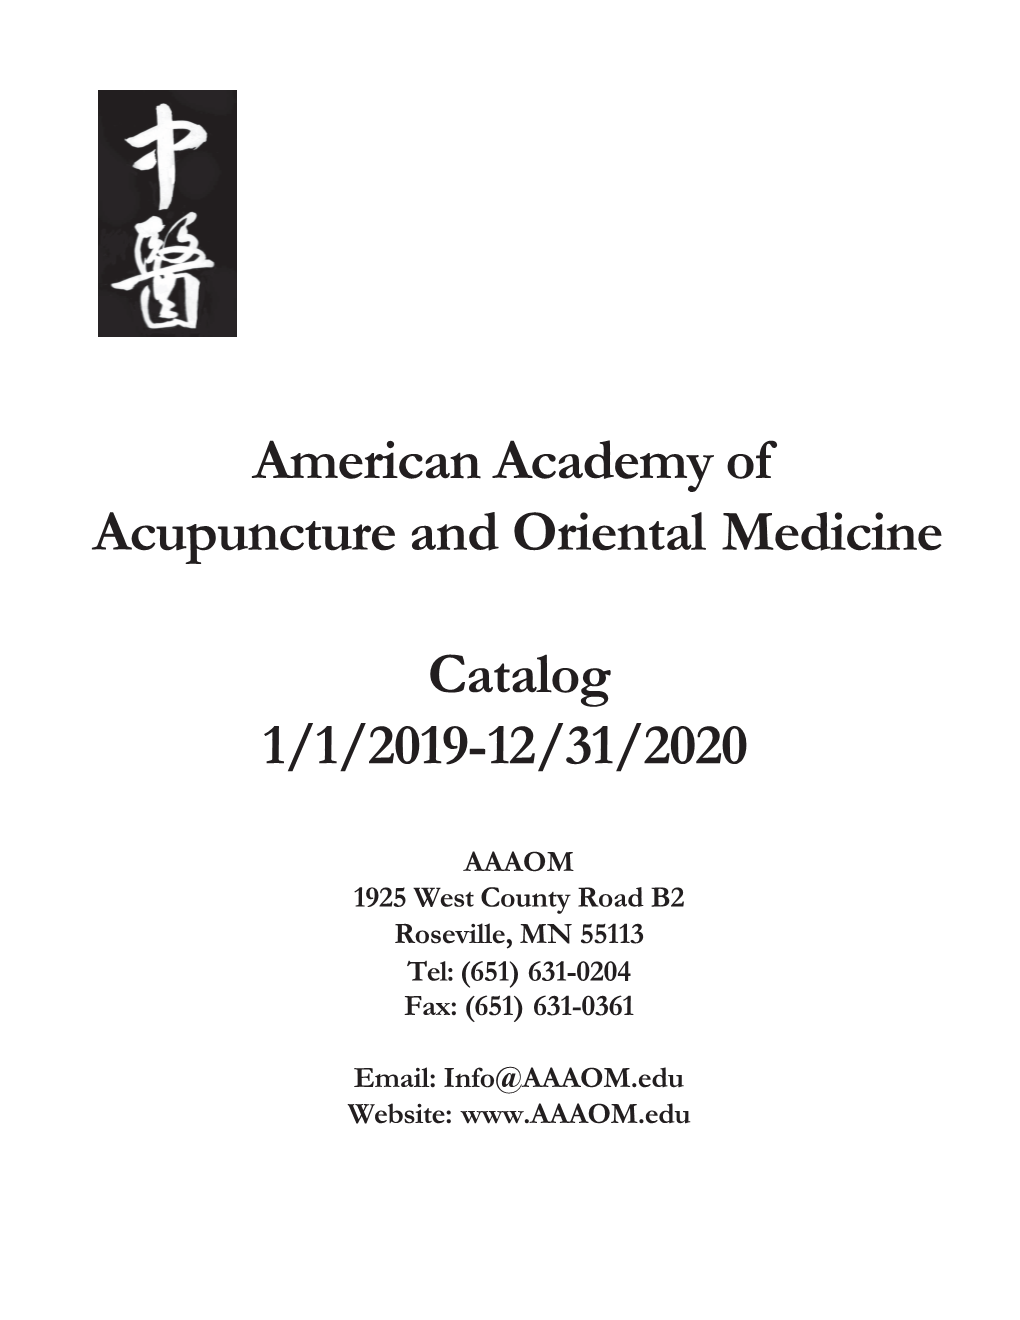 American Academy of Acupuncture and Oriental Medicine Catalog 1/1/2019-12/31/2020